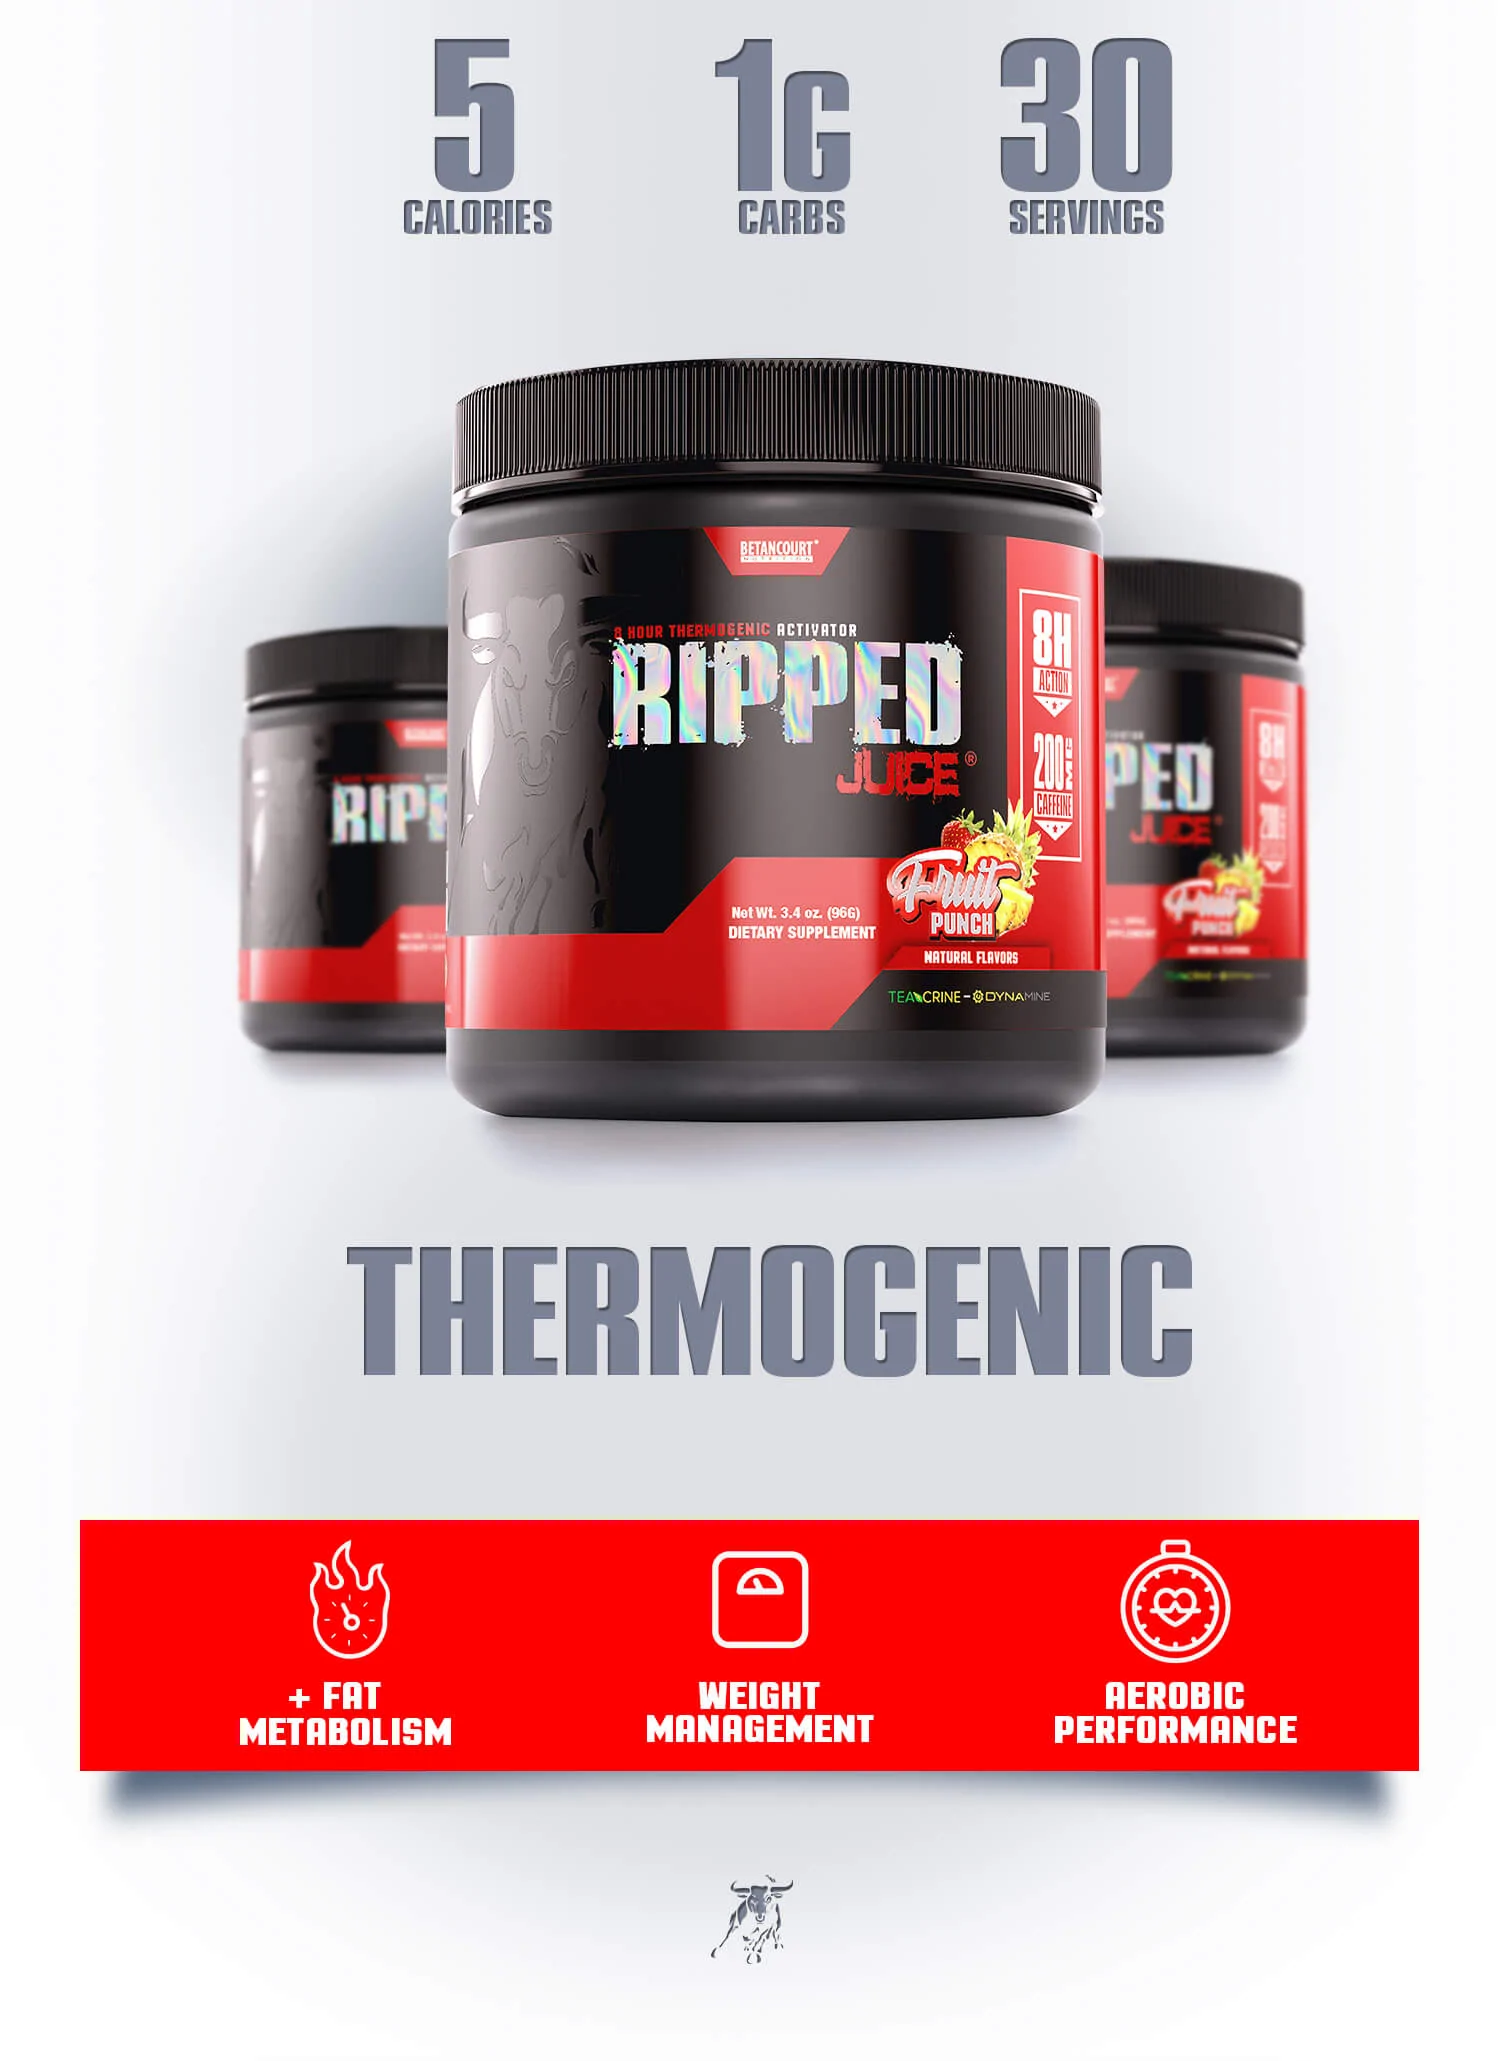 Betancourt B-NOX Ripped Juice (8-HOUR THERMOGENIC ACTIVATOR)